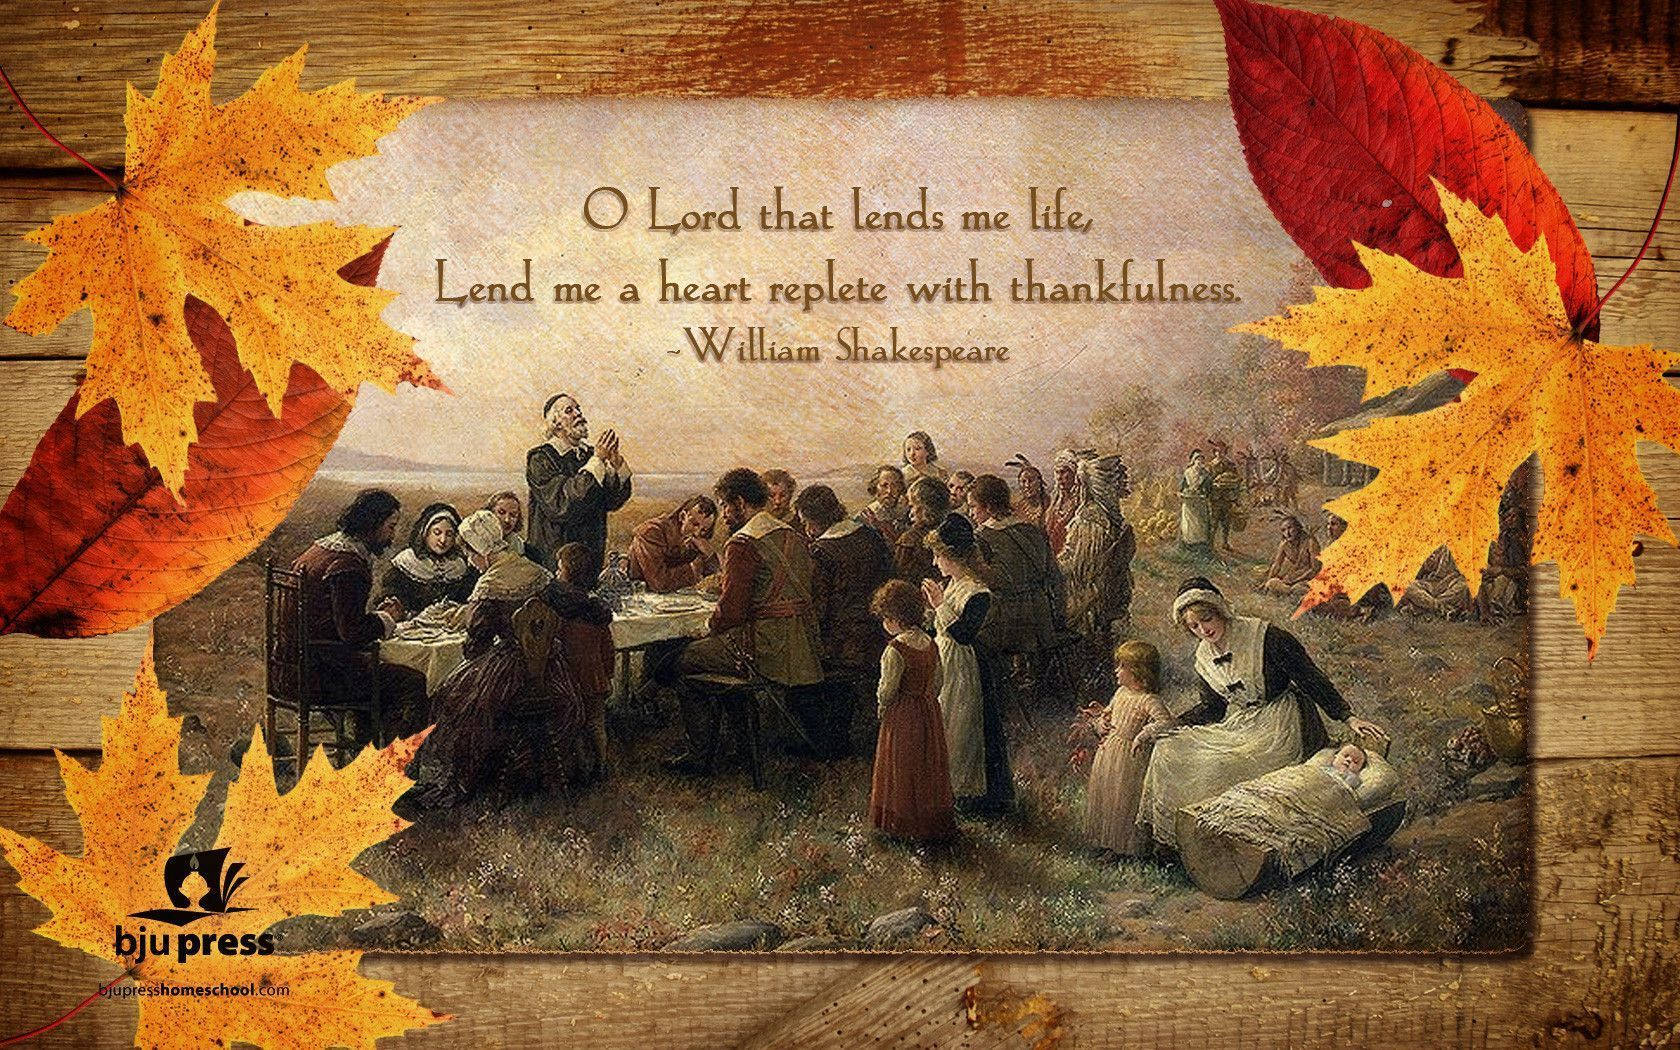 Thanksgiving Wallpapers & Backgrounds